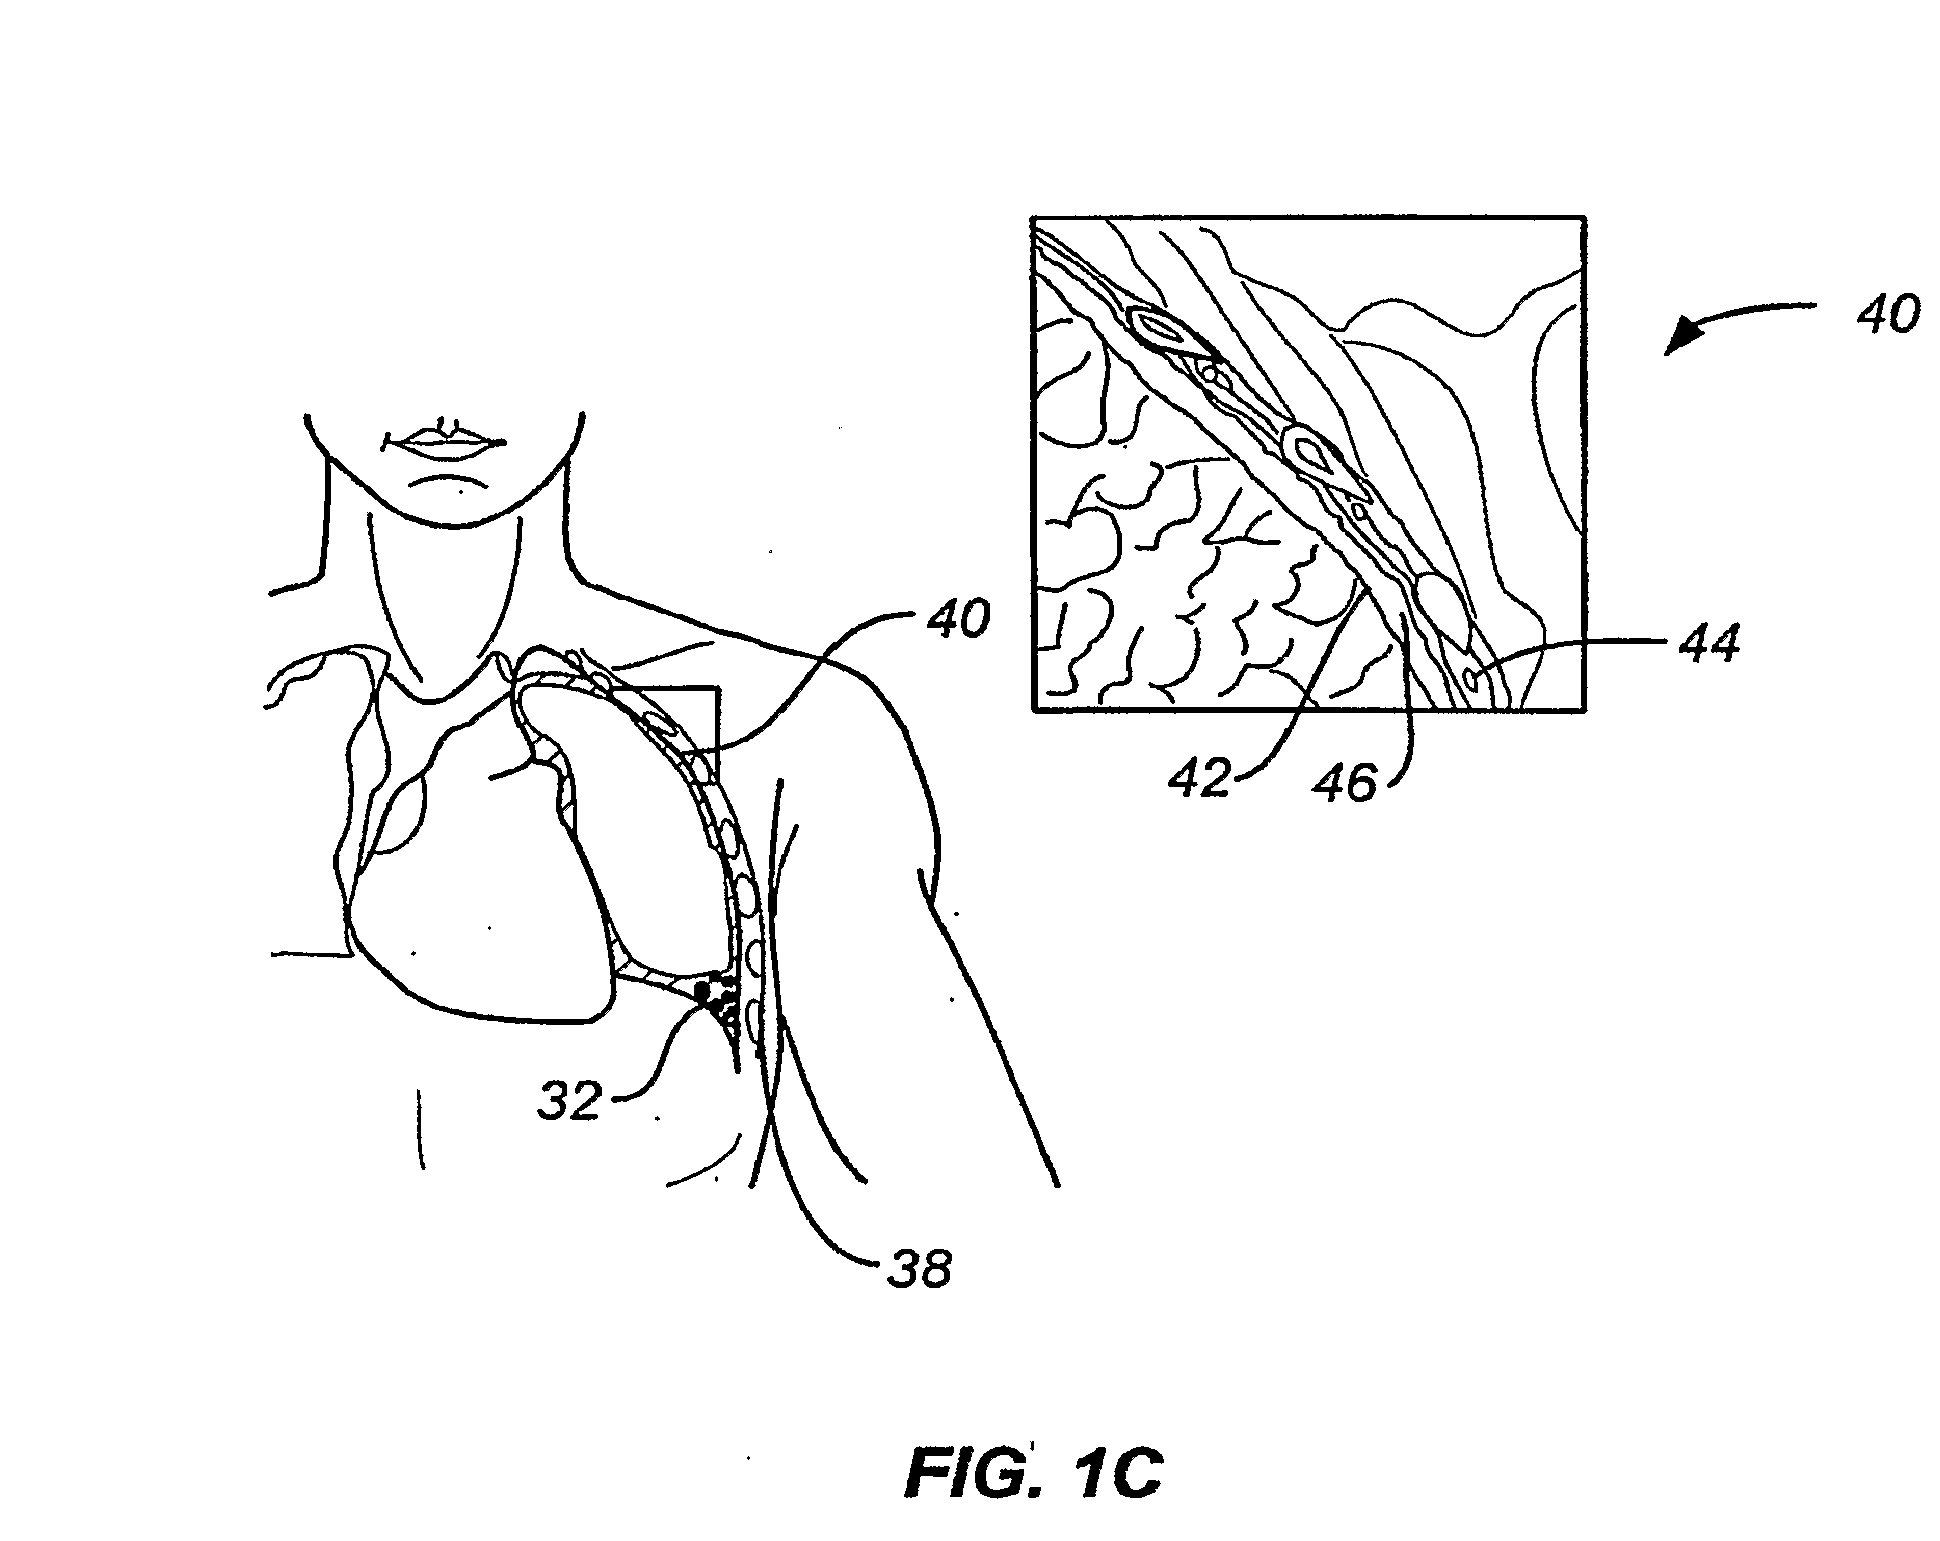 Minimally invasive lung volume reduction devices, methods, and systems